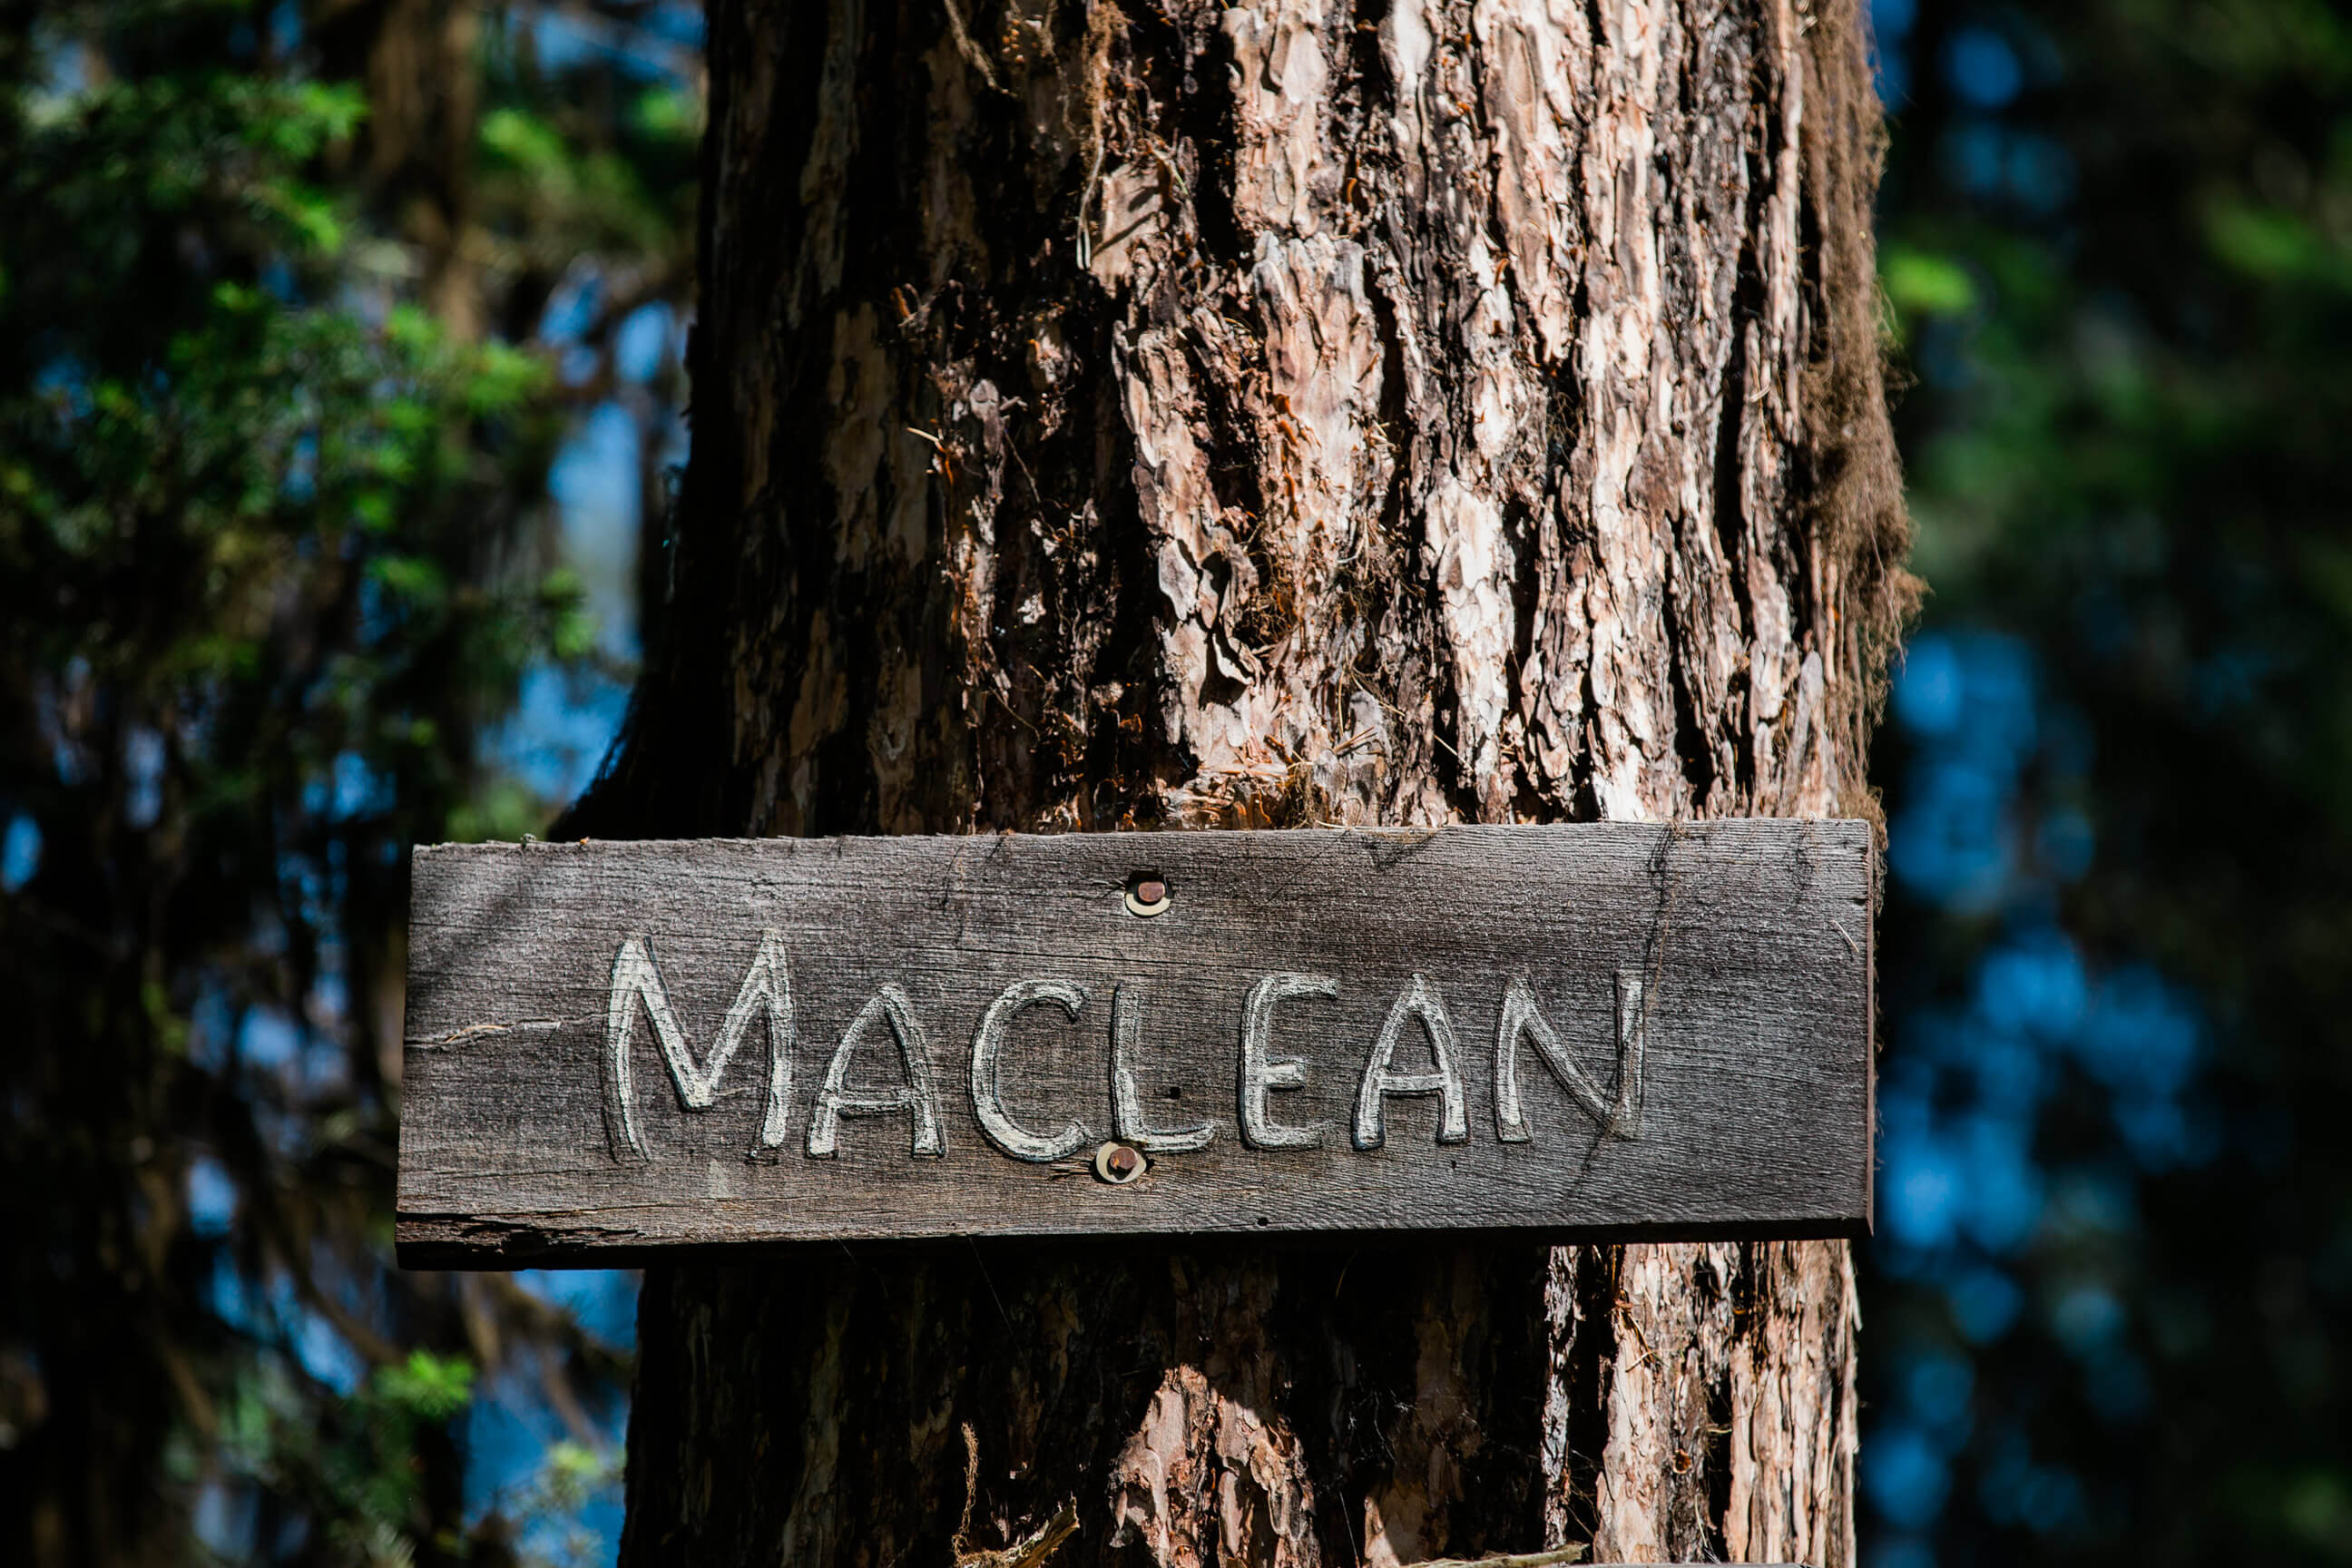 A sign indicates Norman Maclean's cabin on Seeley Lake is nearby